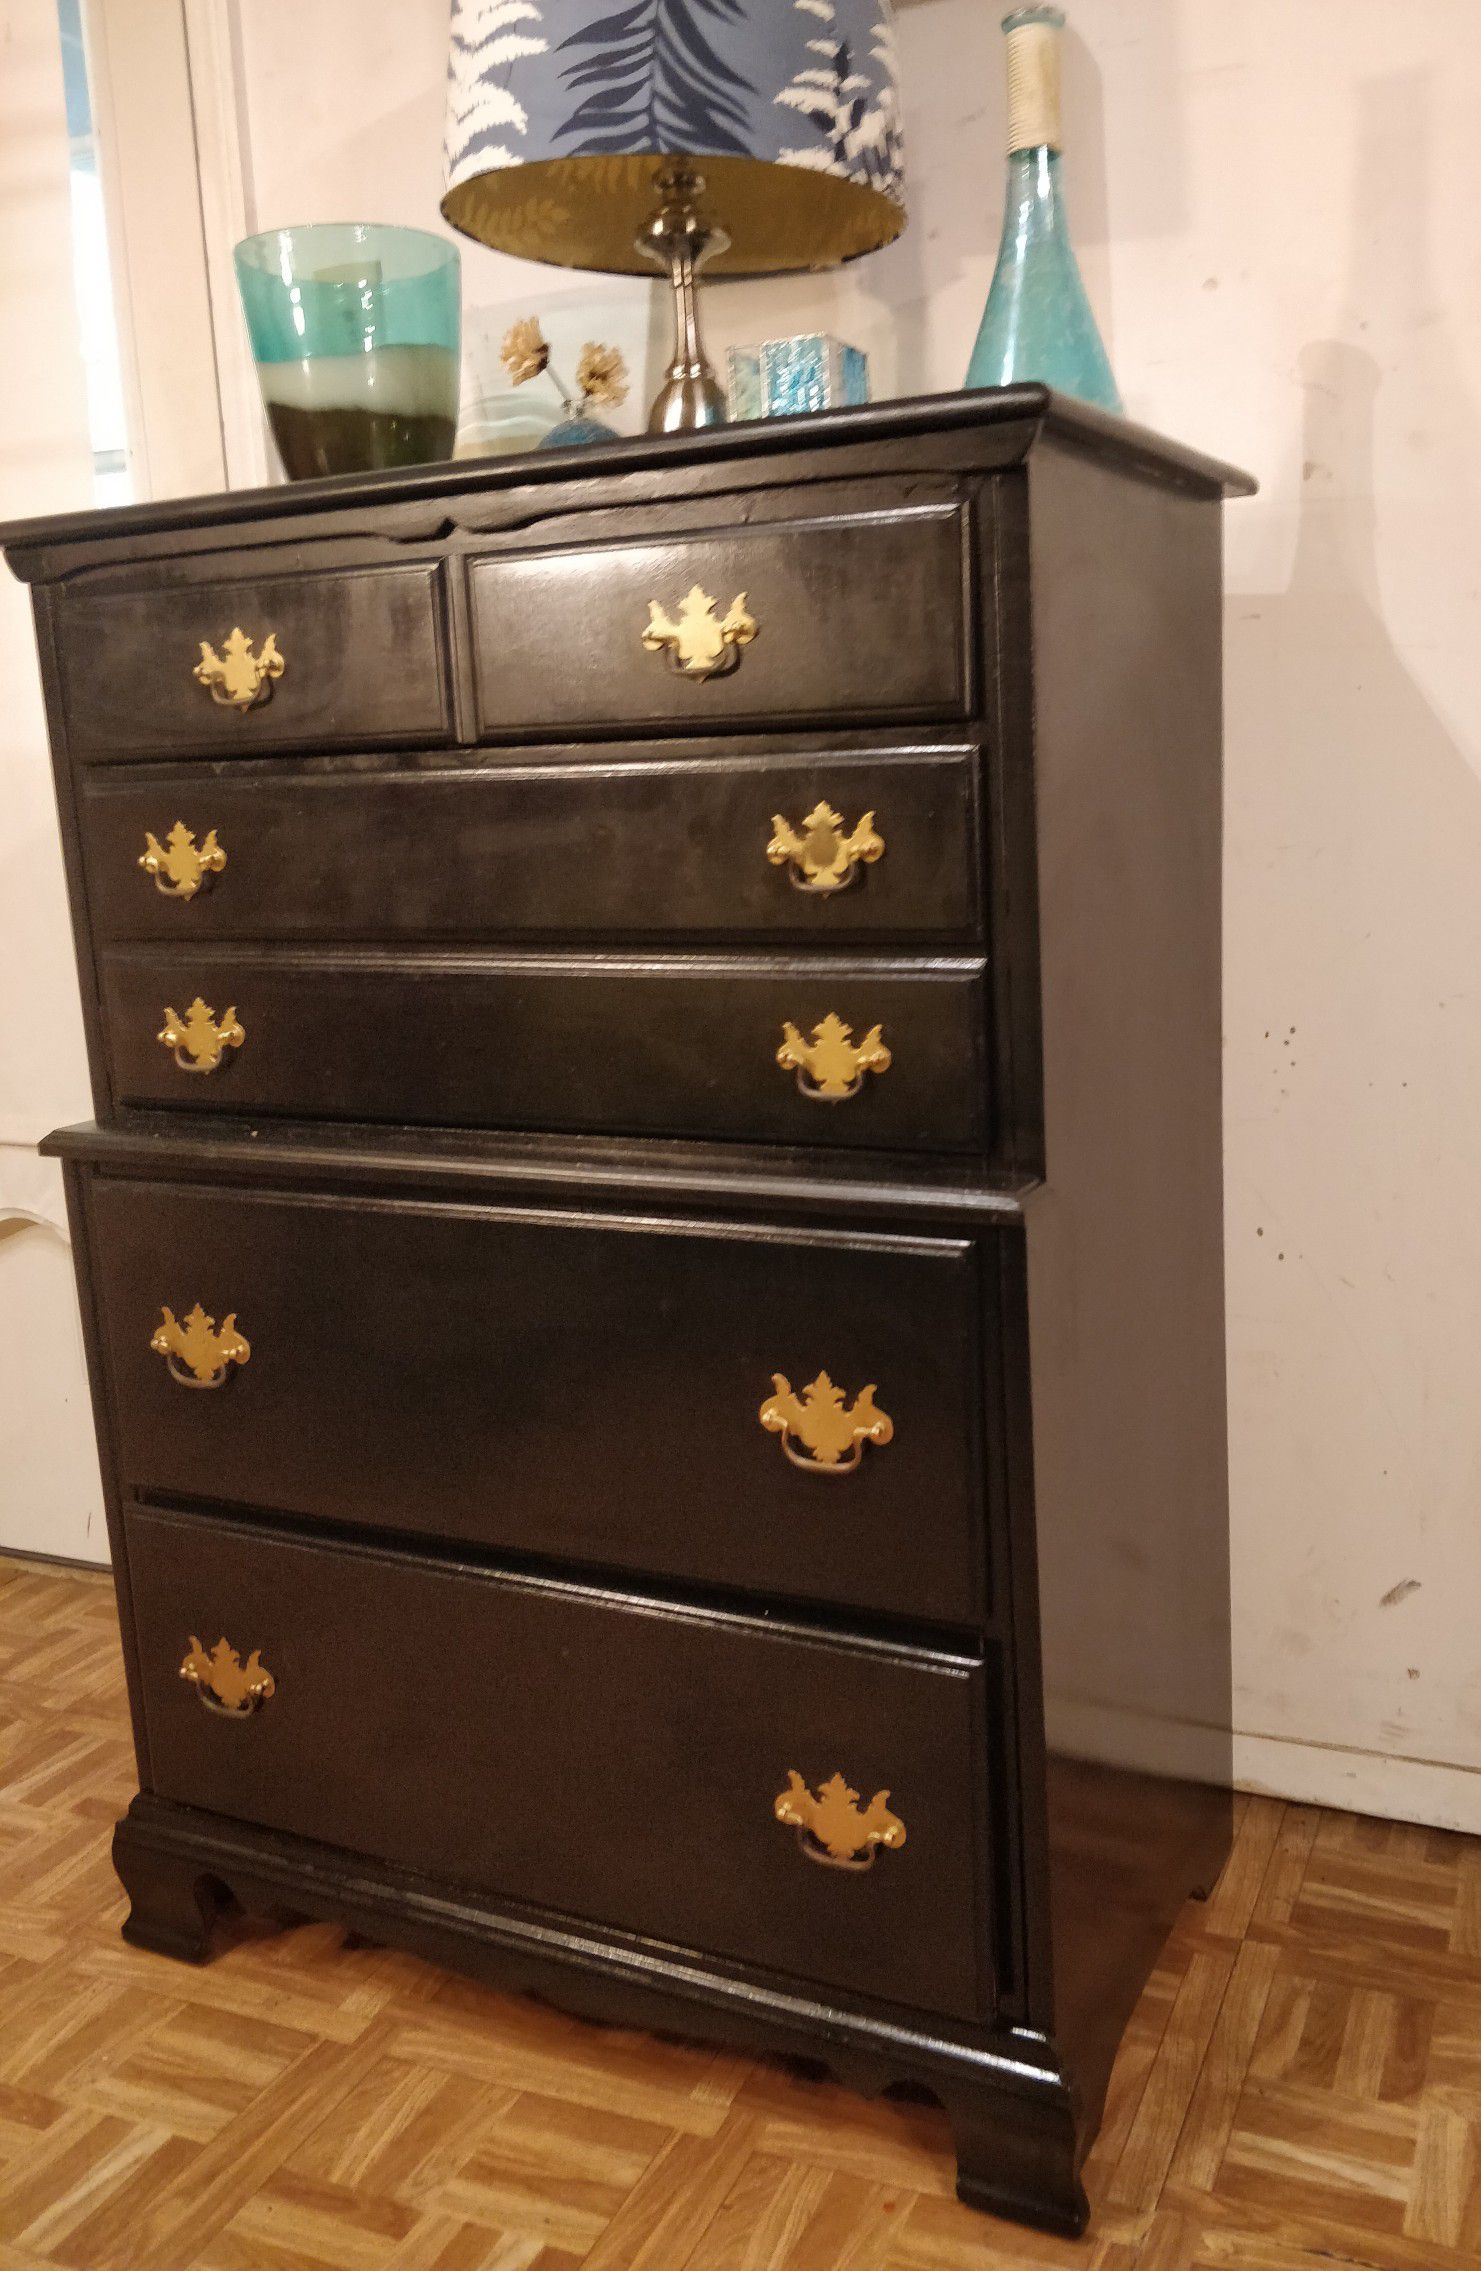 Solid wood chest dresser with big drawers in very good condition, all drawers working well, dovetail drawers. L32"*W19"*H45"